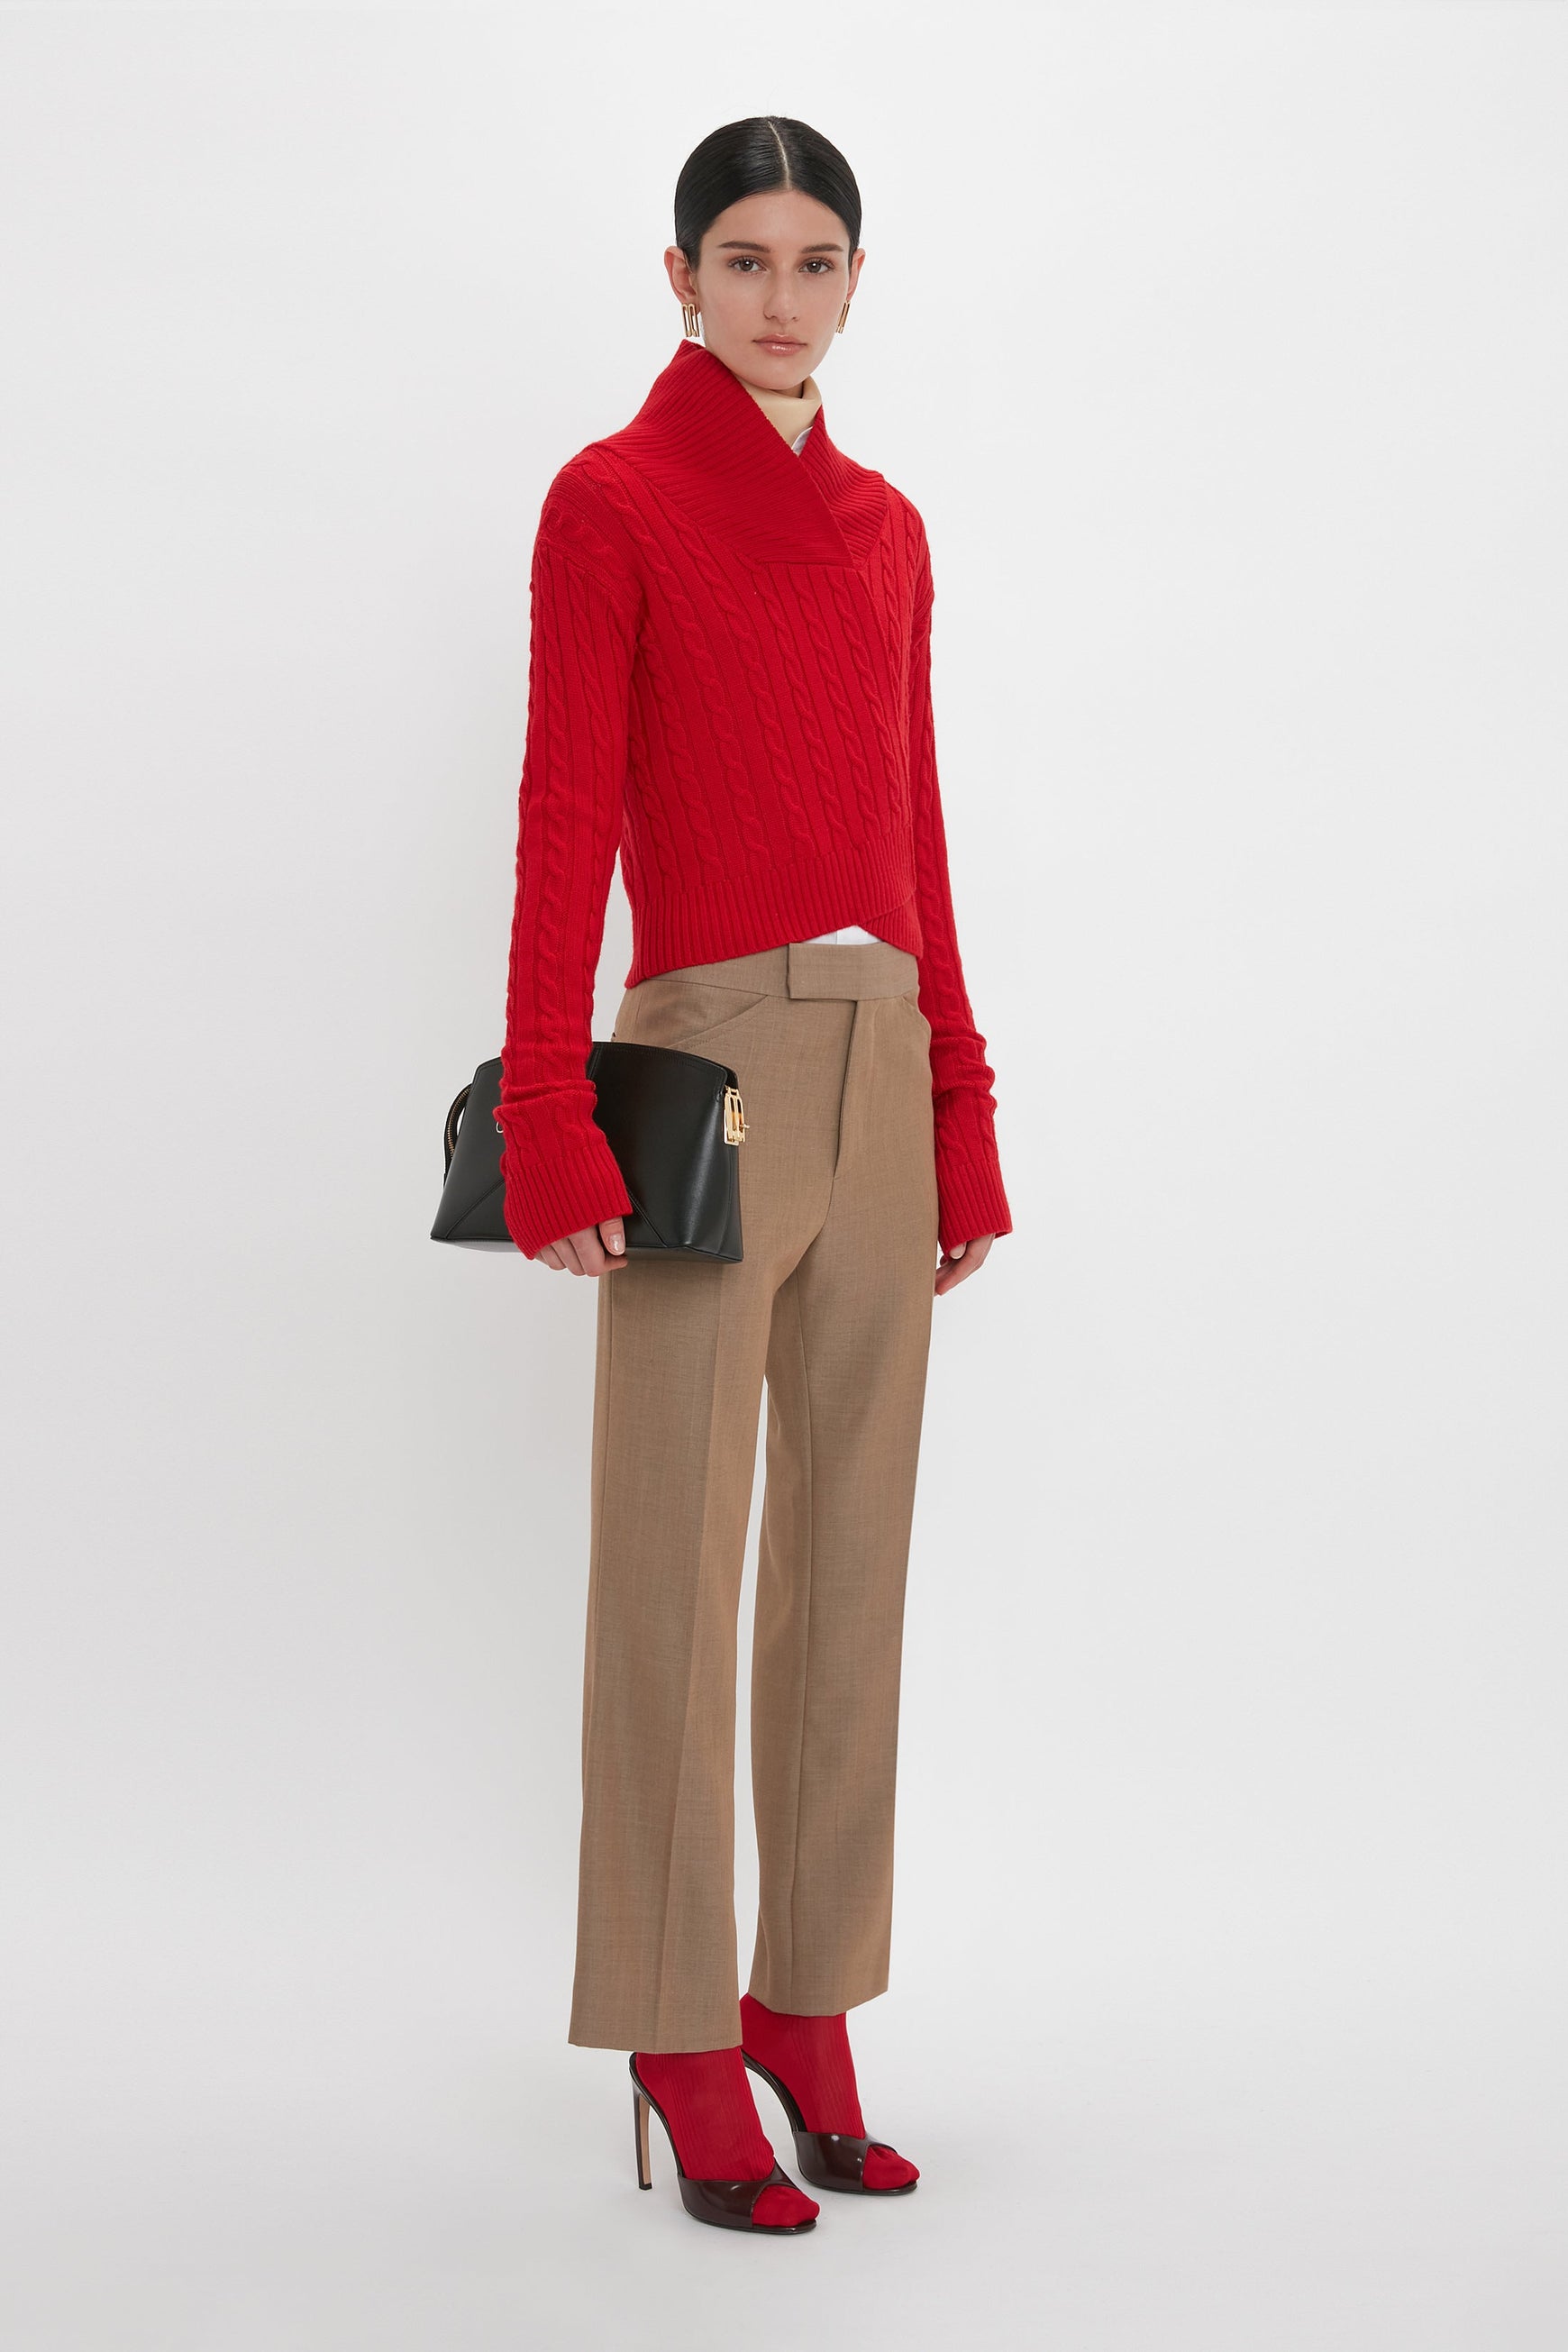 A woman stands against a plain white background wearing a red turtleneck sweater, Victoria Beckham's Wide Cropped Flare Trouser In Tobacco with a contemporary kick hem, red high heels, and holding a black handbag.